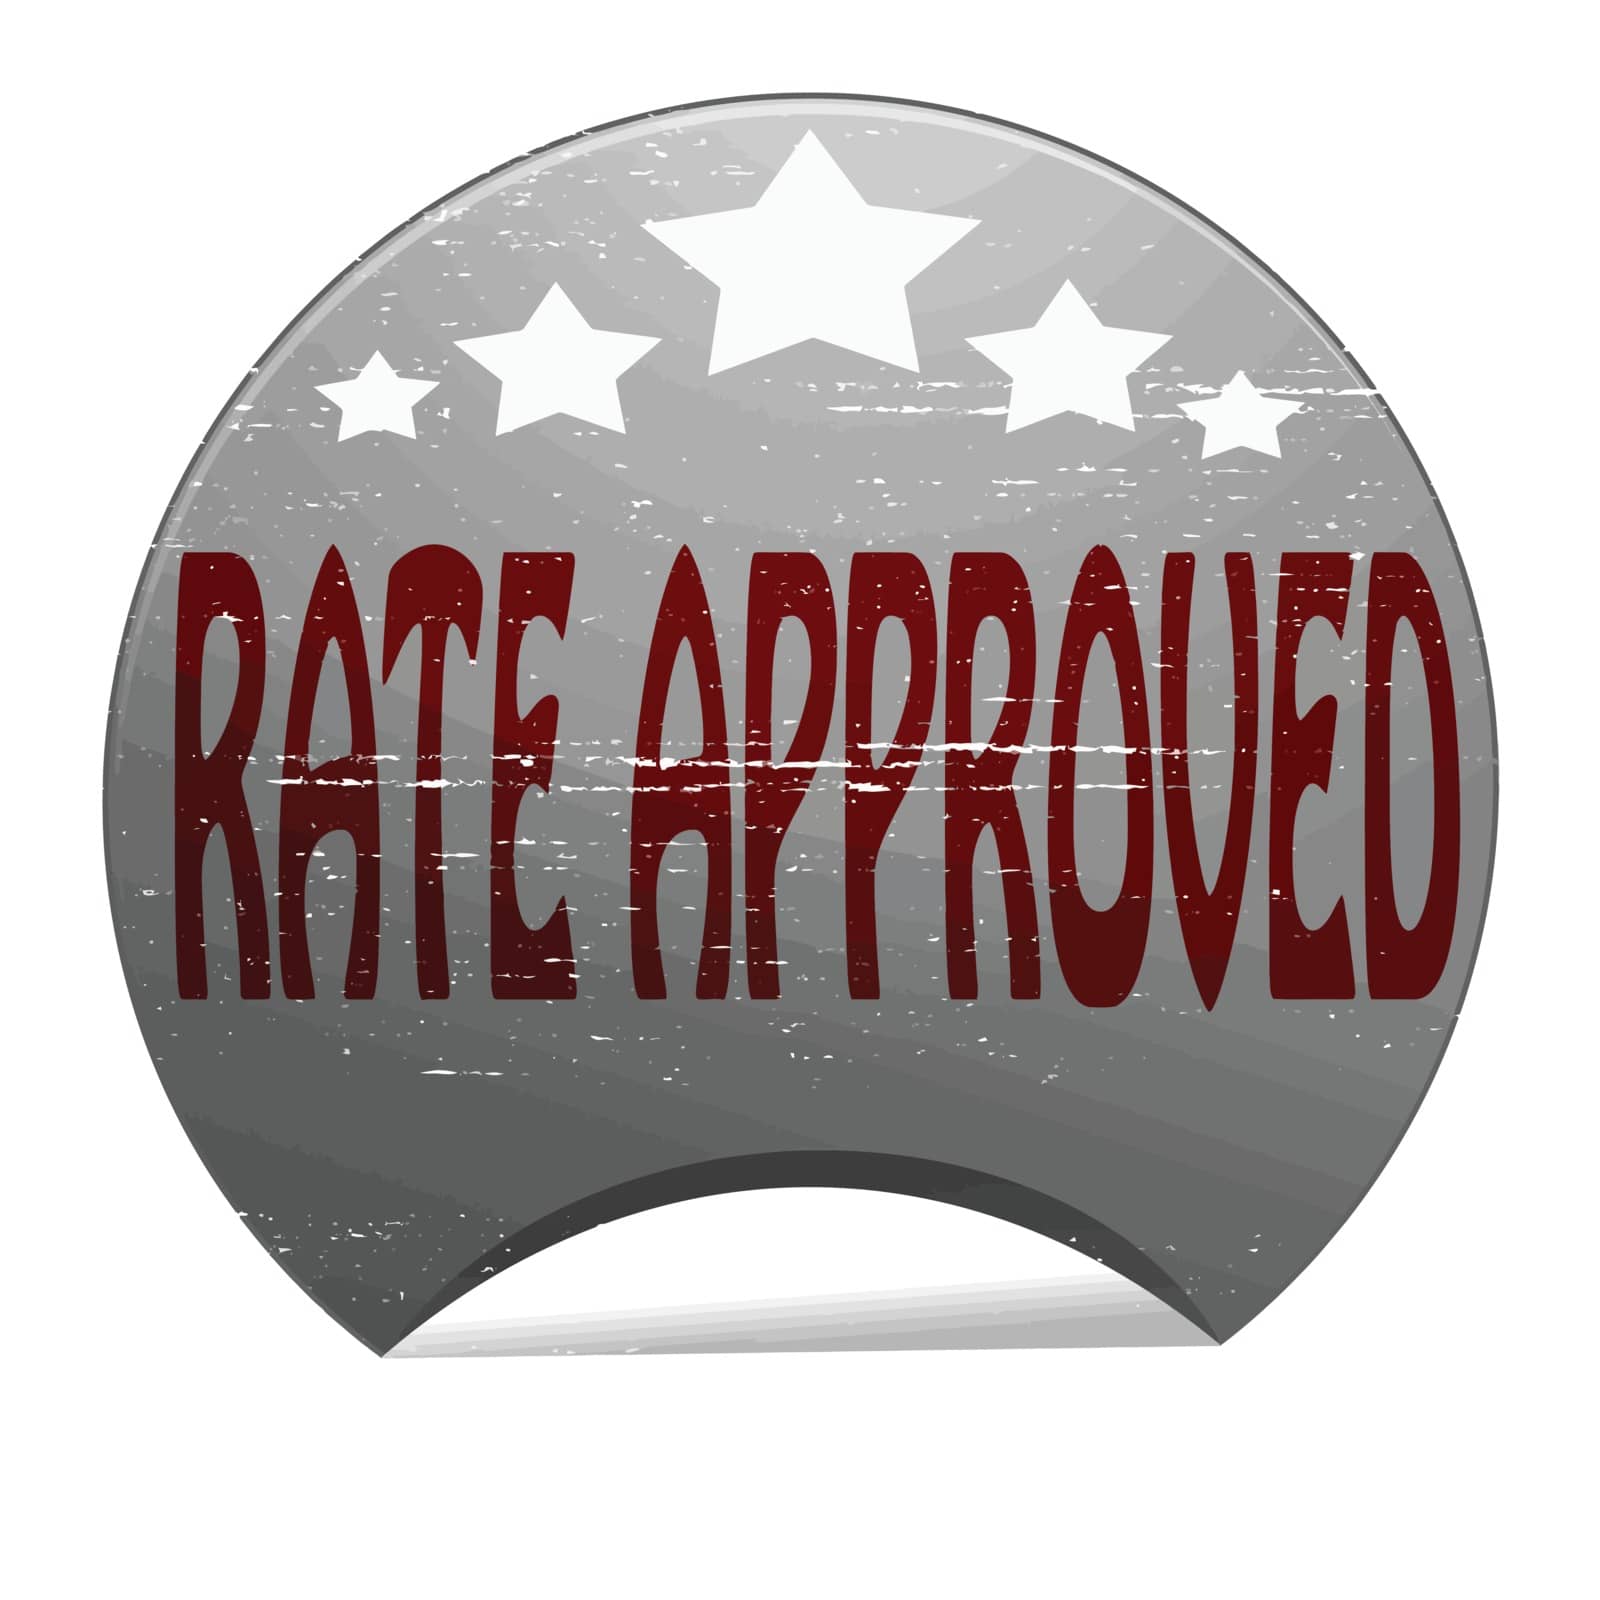 Rate approved by carmenbobo